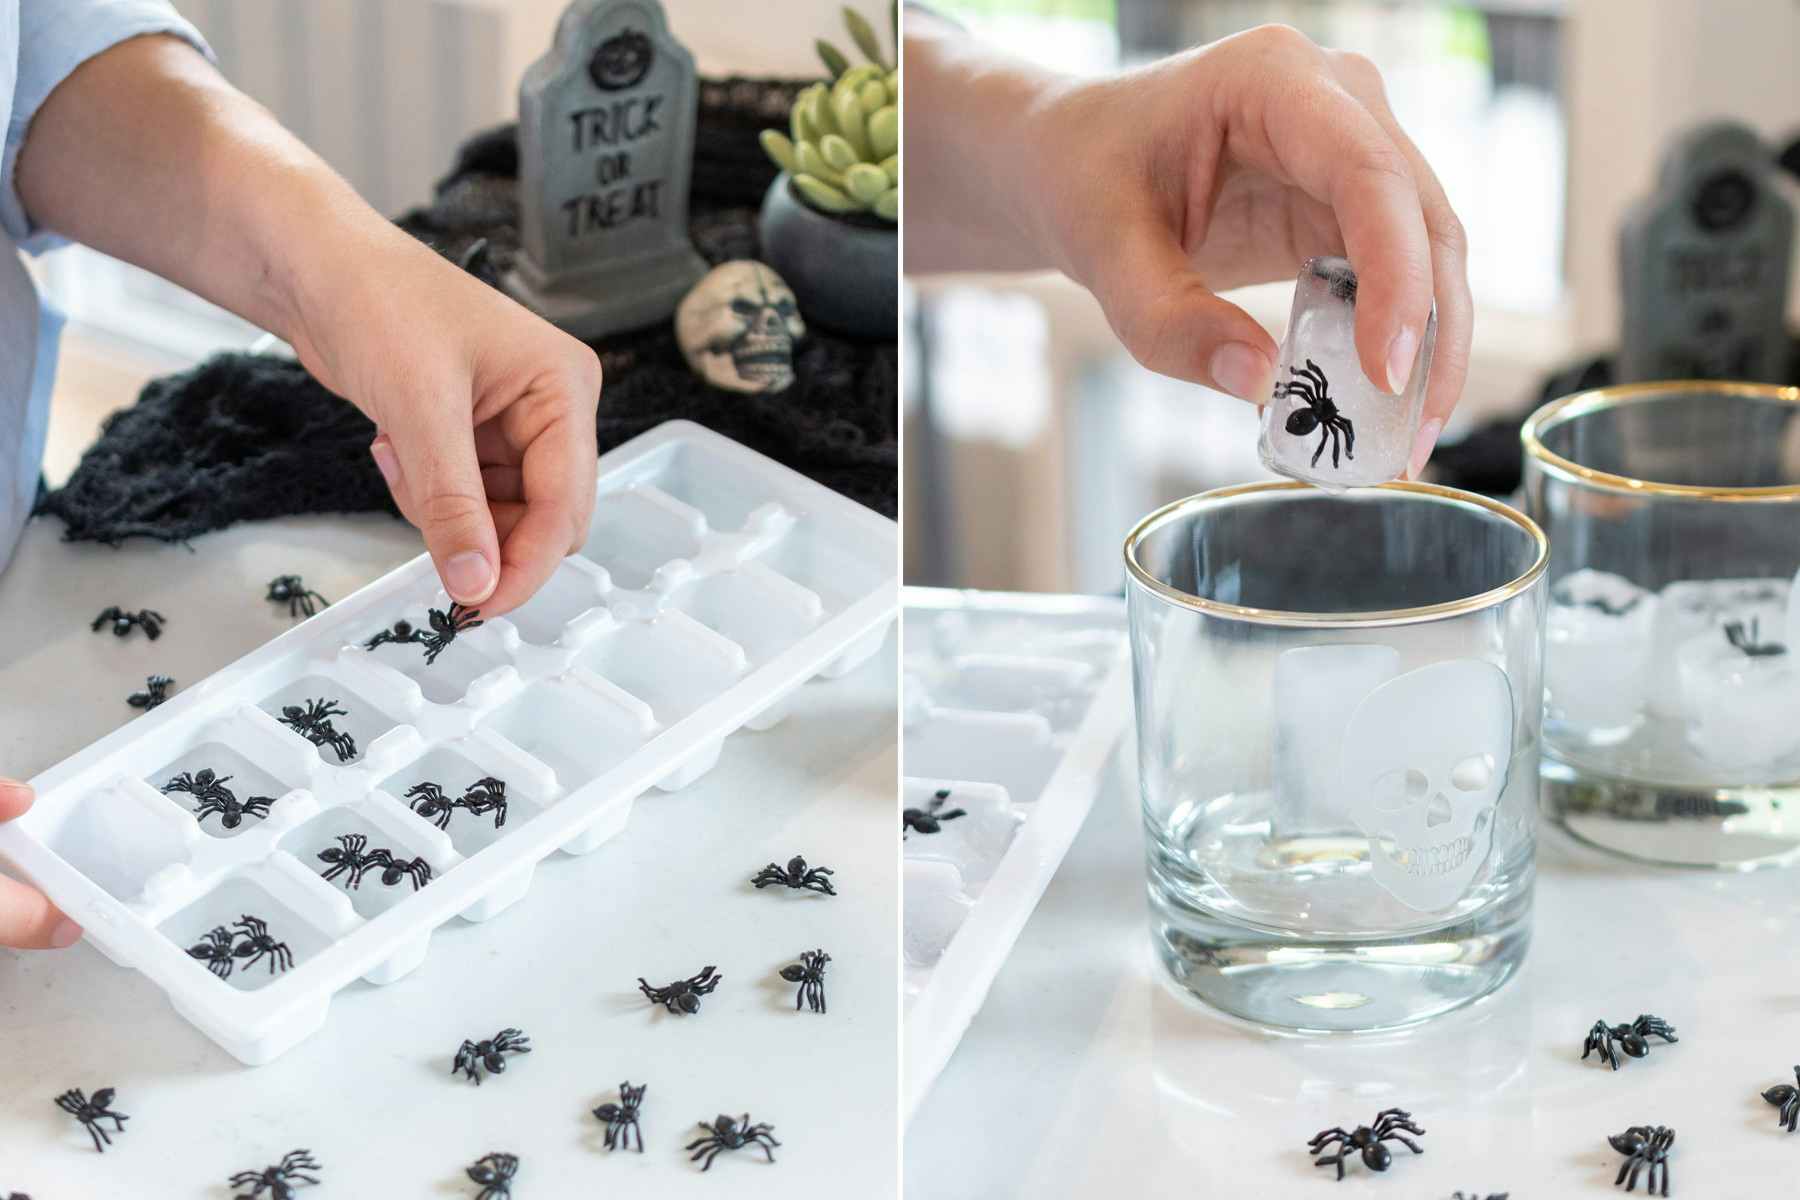 Fill an ice cube tray, add plastic spiders, and freeze.